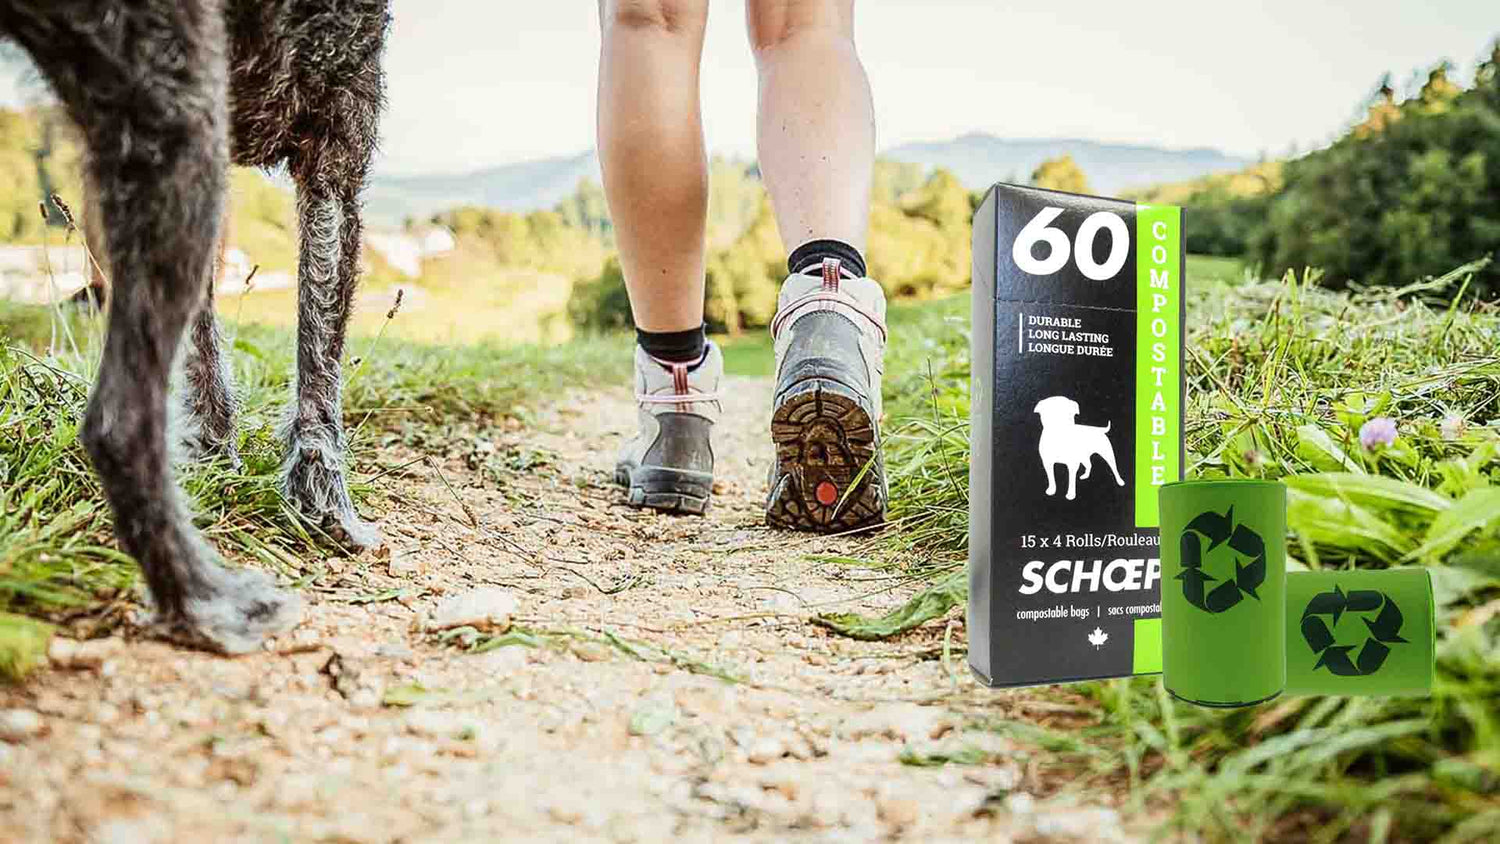 SCHOEP biodegradable dog and compostable pet poop bags. Greencart friendly in cities that allow pet waste into their greencarts. 